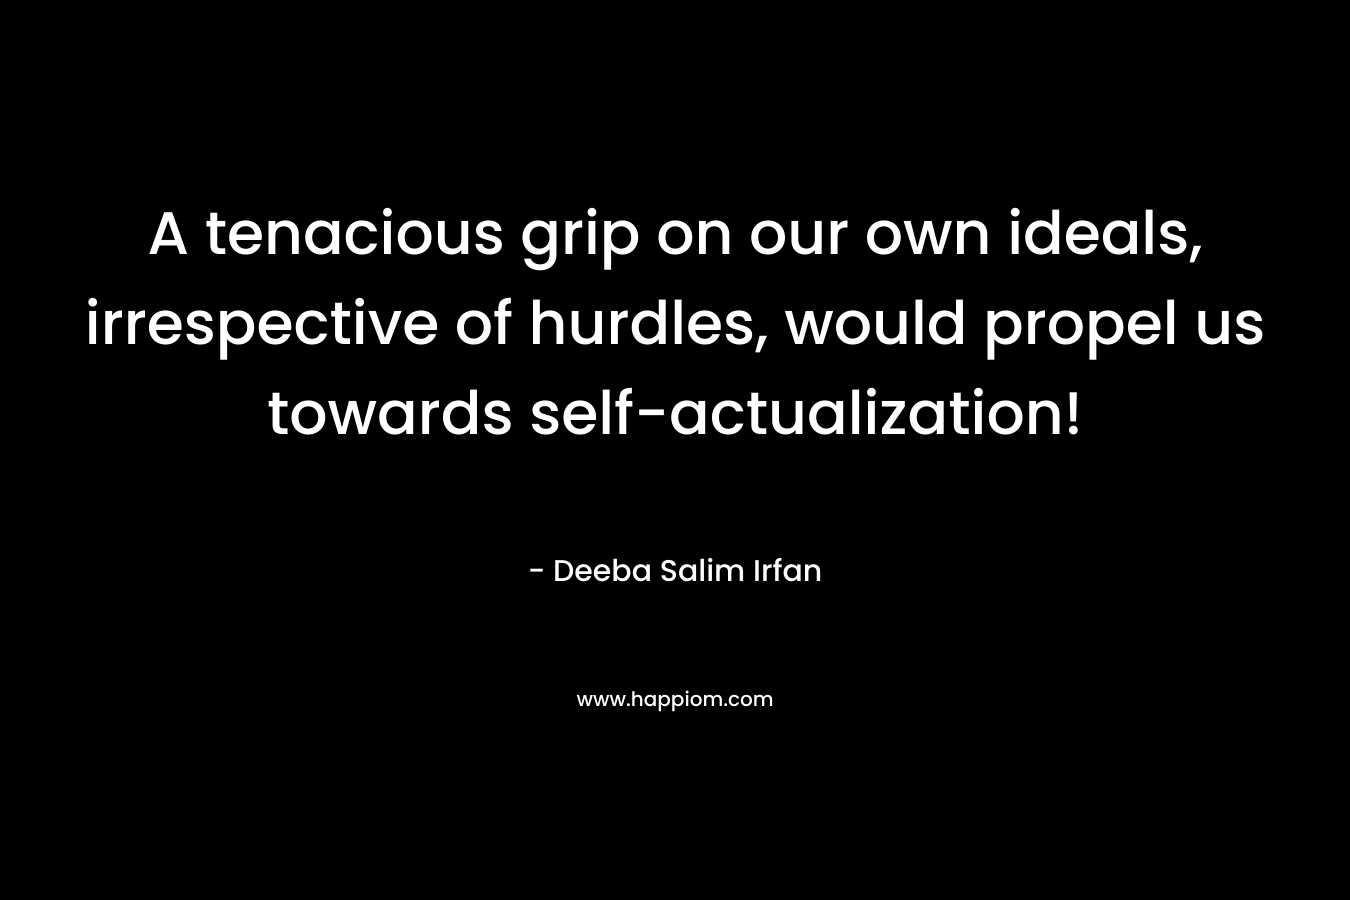 A tenacious grip on our own ideals, irrespective of hurdles, would propel us towards self-actualization! – Deeba Salim Irfan